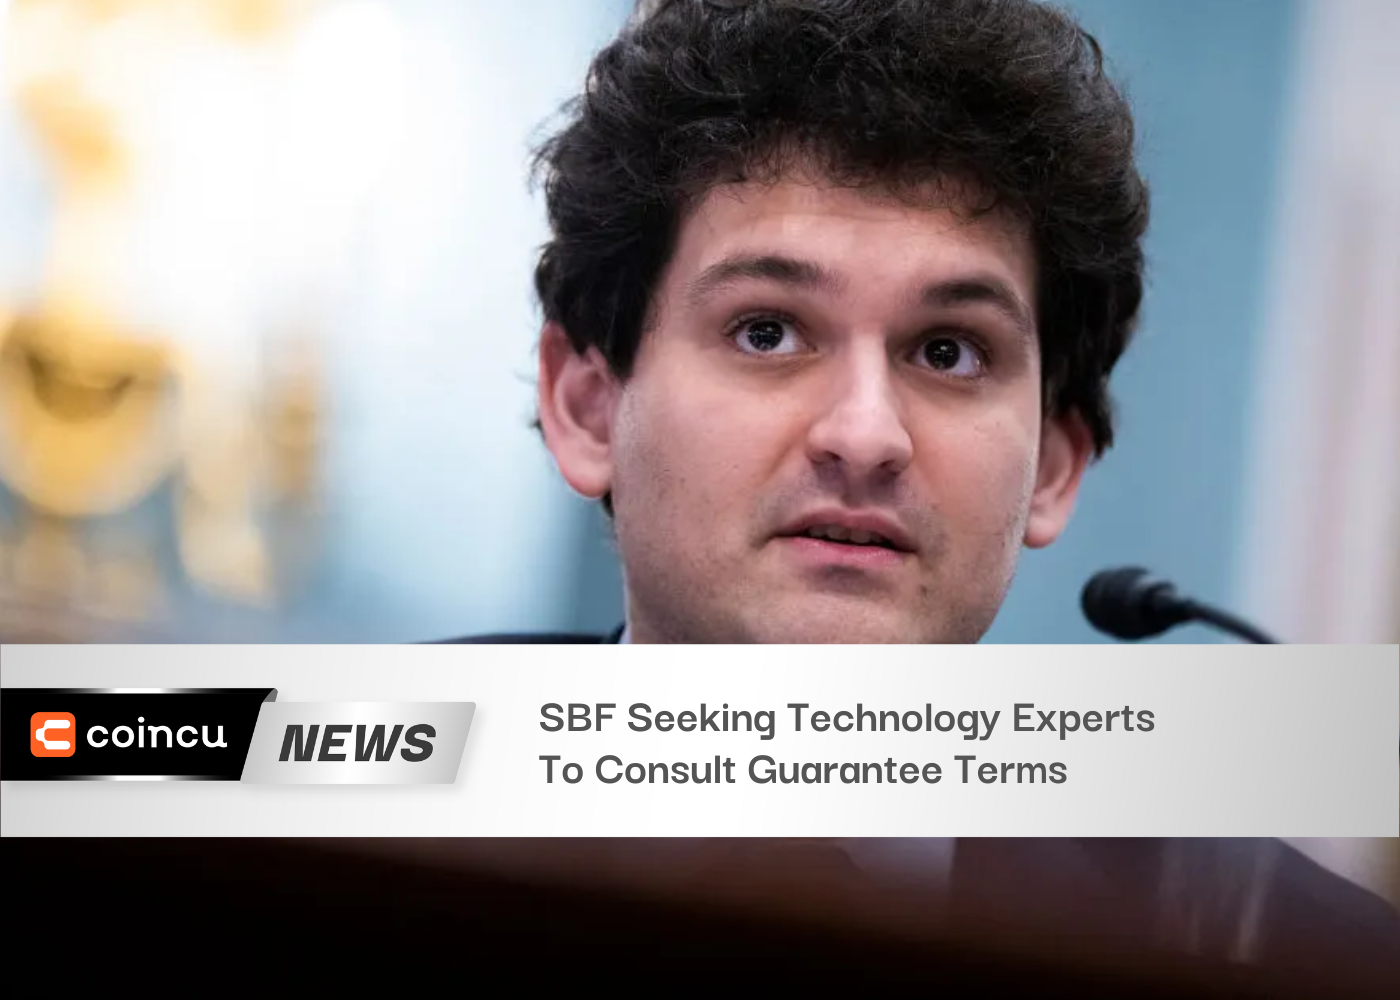 SBF Seeking Technology Experts To Consult Guarantee Terms